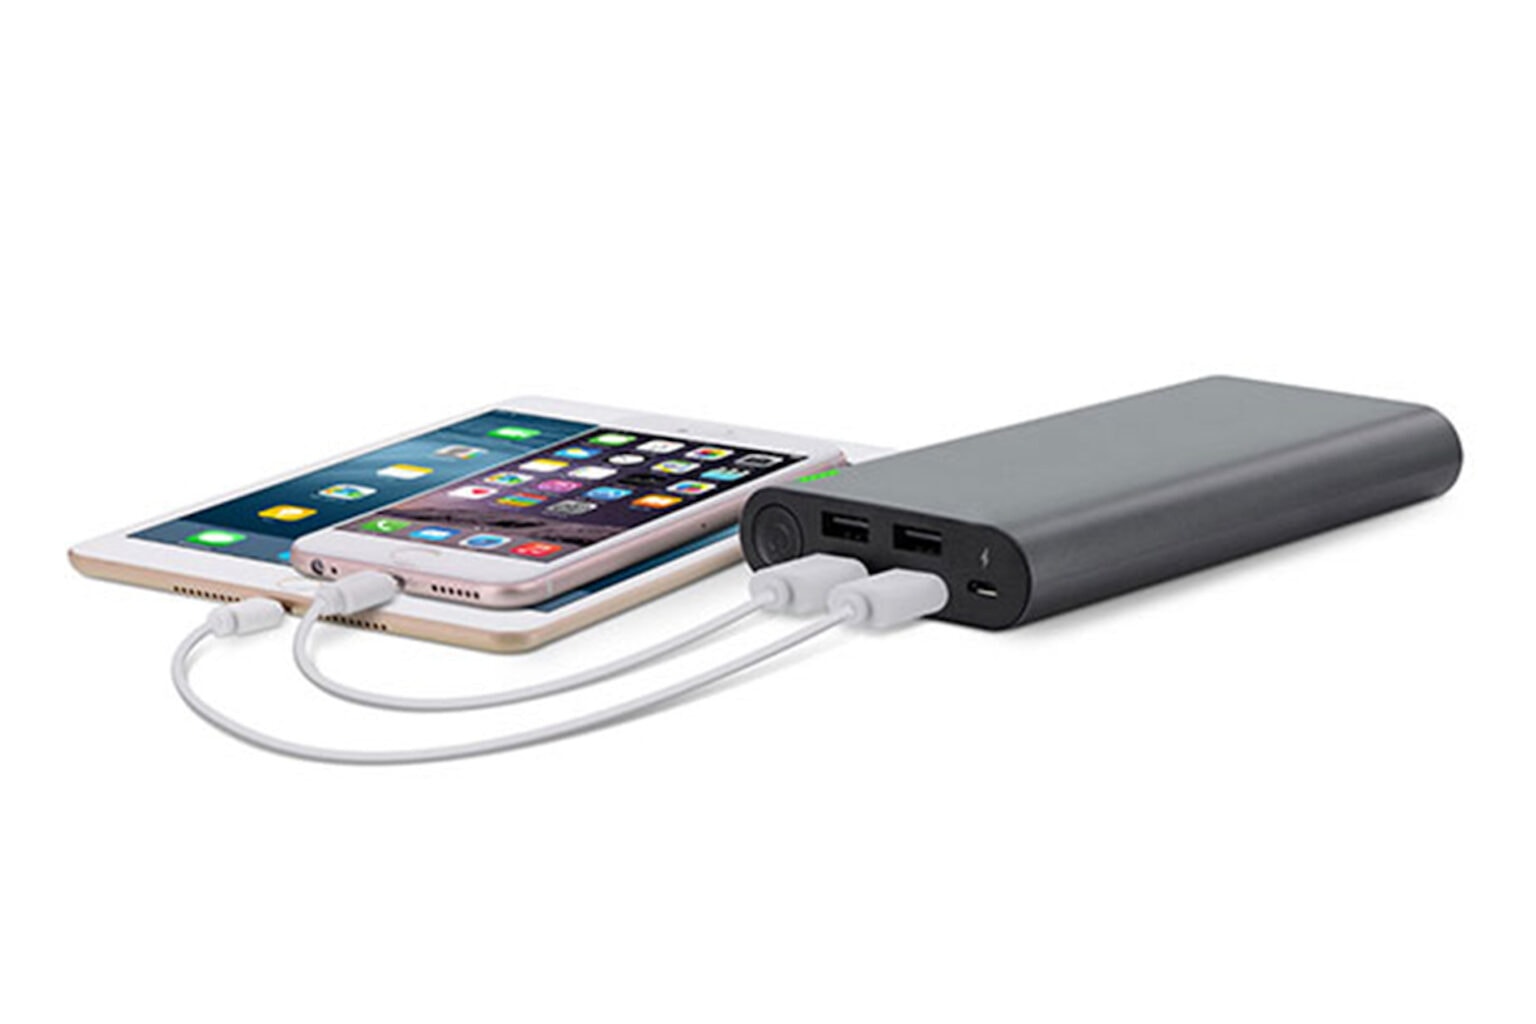 Charge your iPhone, iPad, AirPods, and Apple Watch with this massive portable Apple charger.